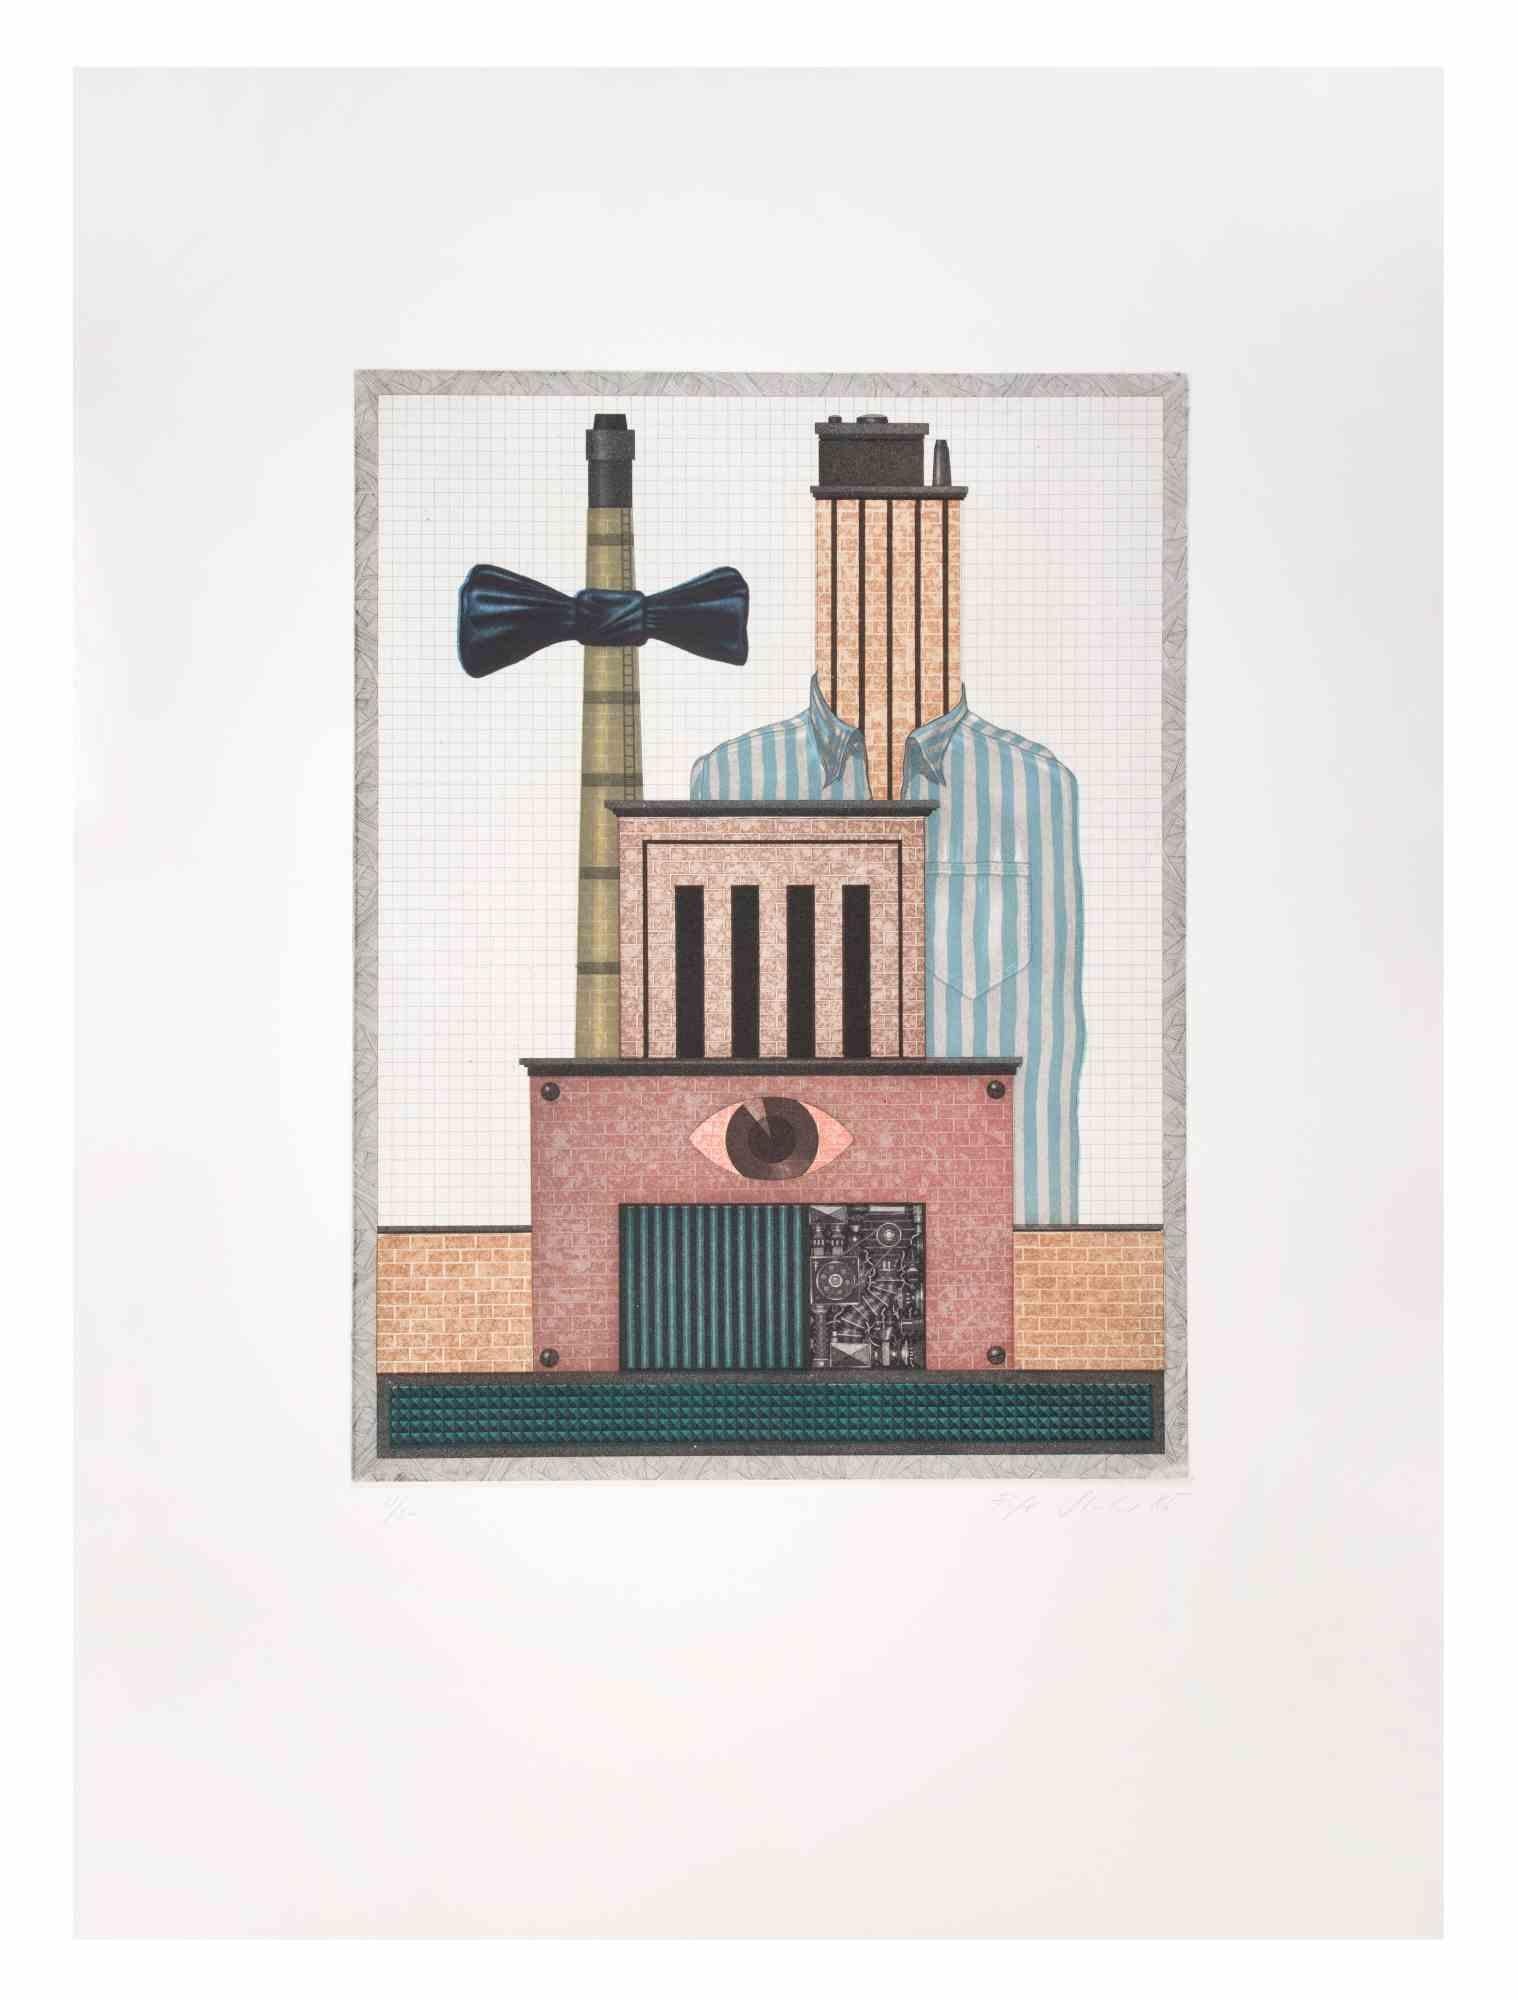 Brauerei is a  contemporary artwork realized by the artist Fifo Stricker in 1985.

Mixed colored aquatint and etching.